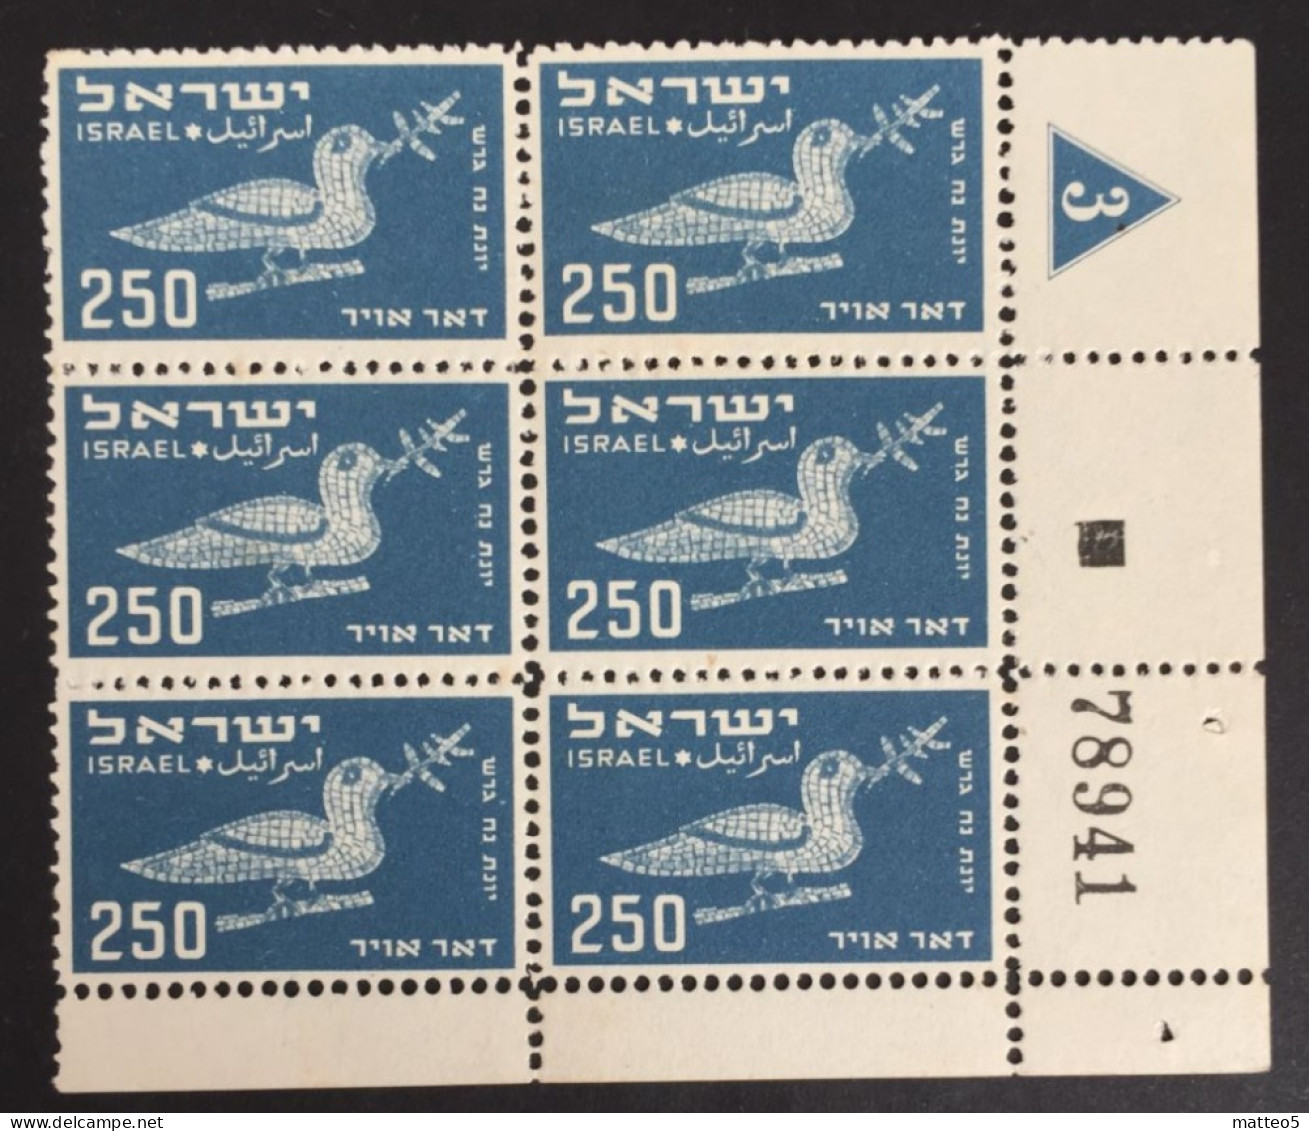 1950 Israel - Airmail - Bird Representation, Dove With Olive Branch - 6 Stamps - Unused - Nuevos (sin Tab)